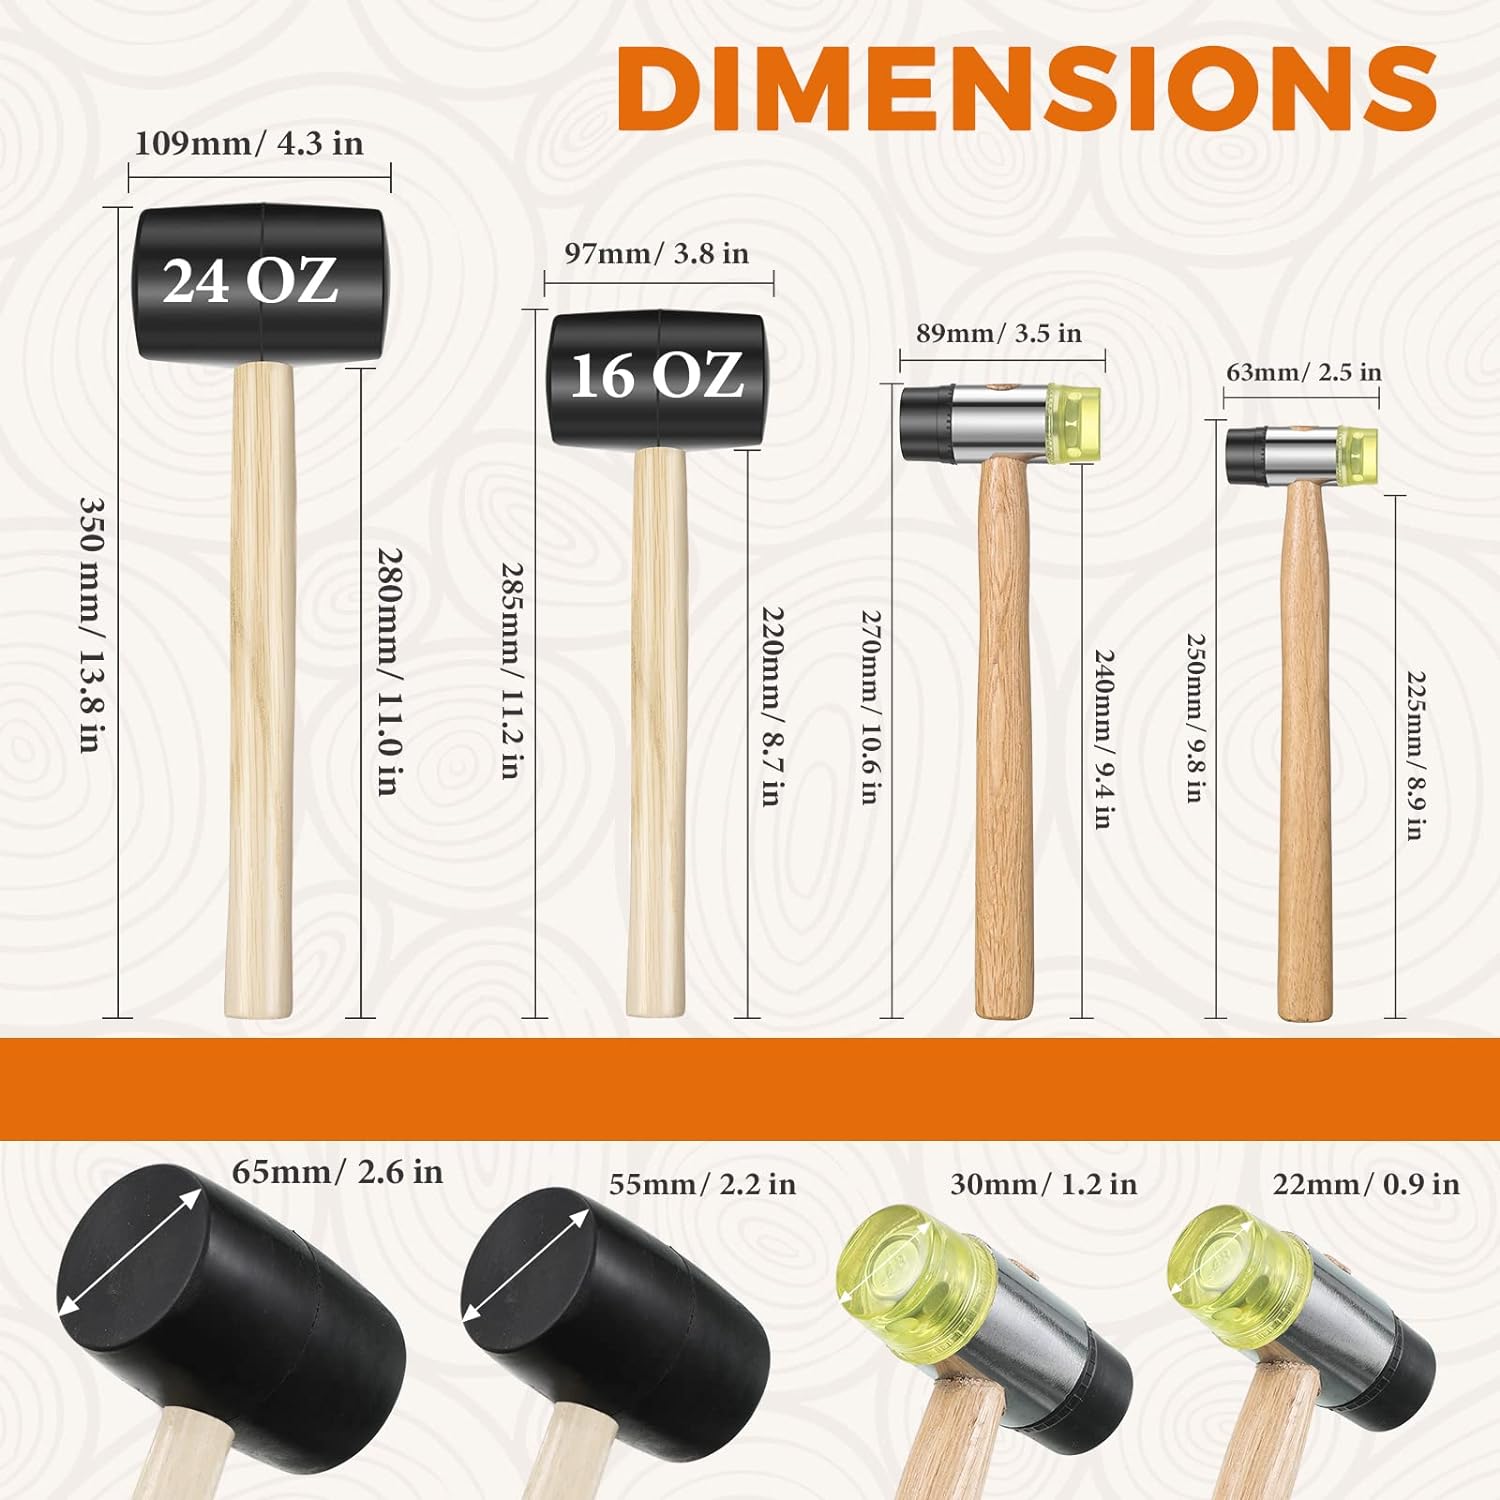 LEIFIDE 4 Pieces 16 oz/ 24 oz Rubber Mallet Hammer and 25 mm/ 35 mm Double Face Hammer, Rubber Hammer Soft Hammer Wood Handle Hammer fo